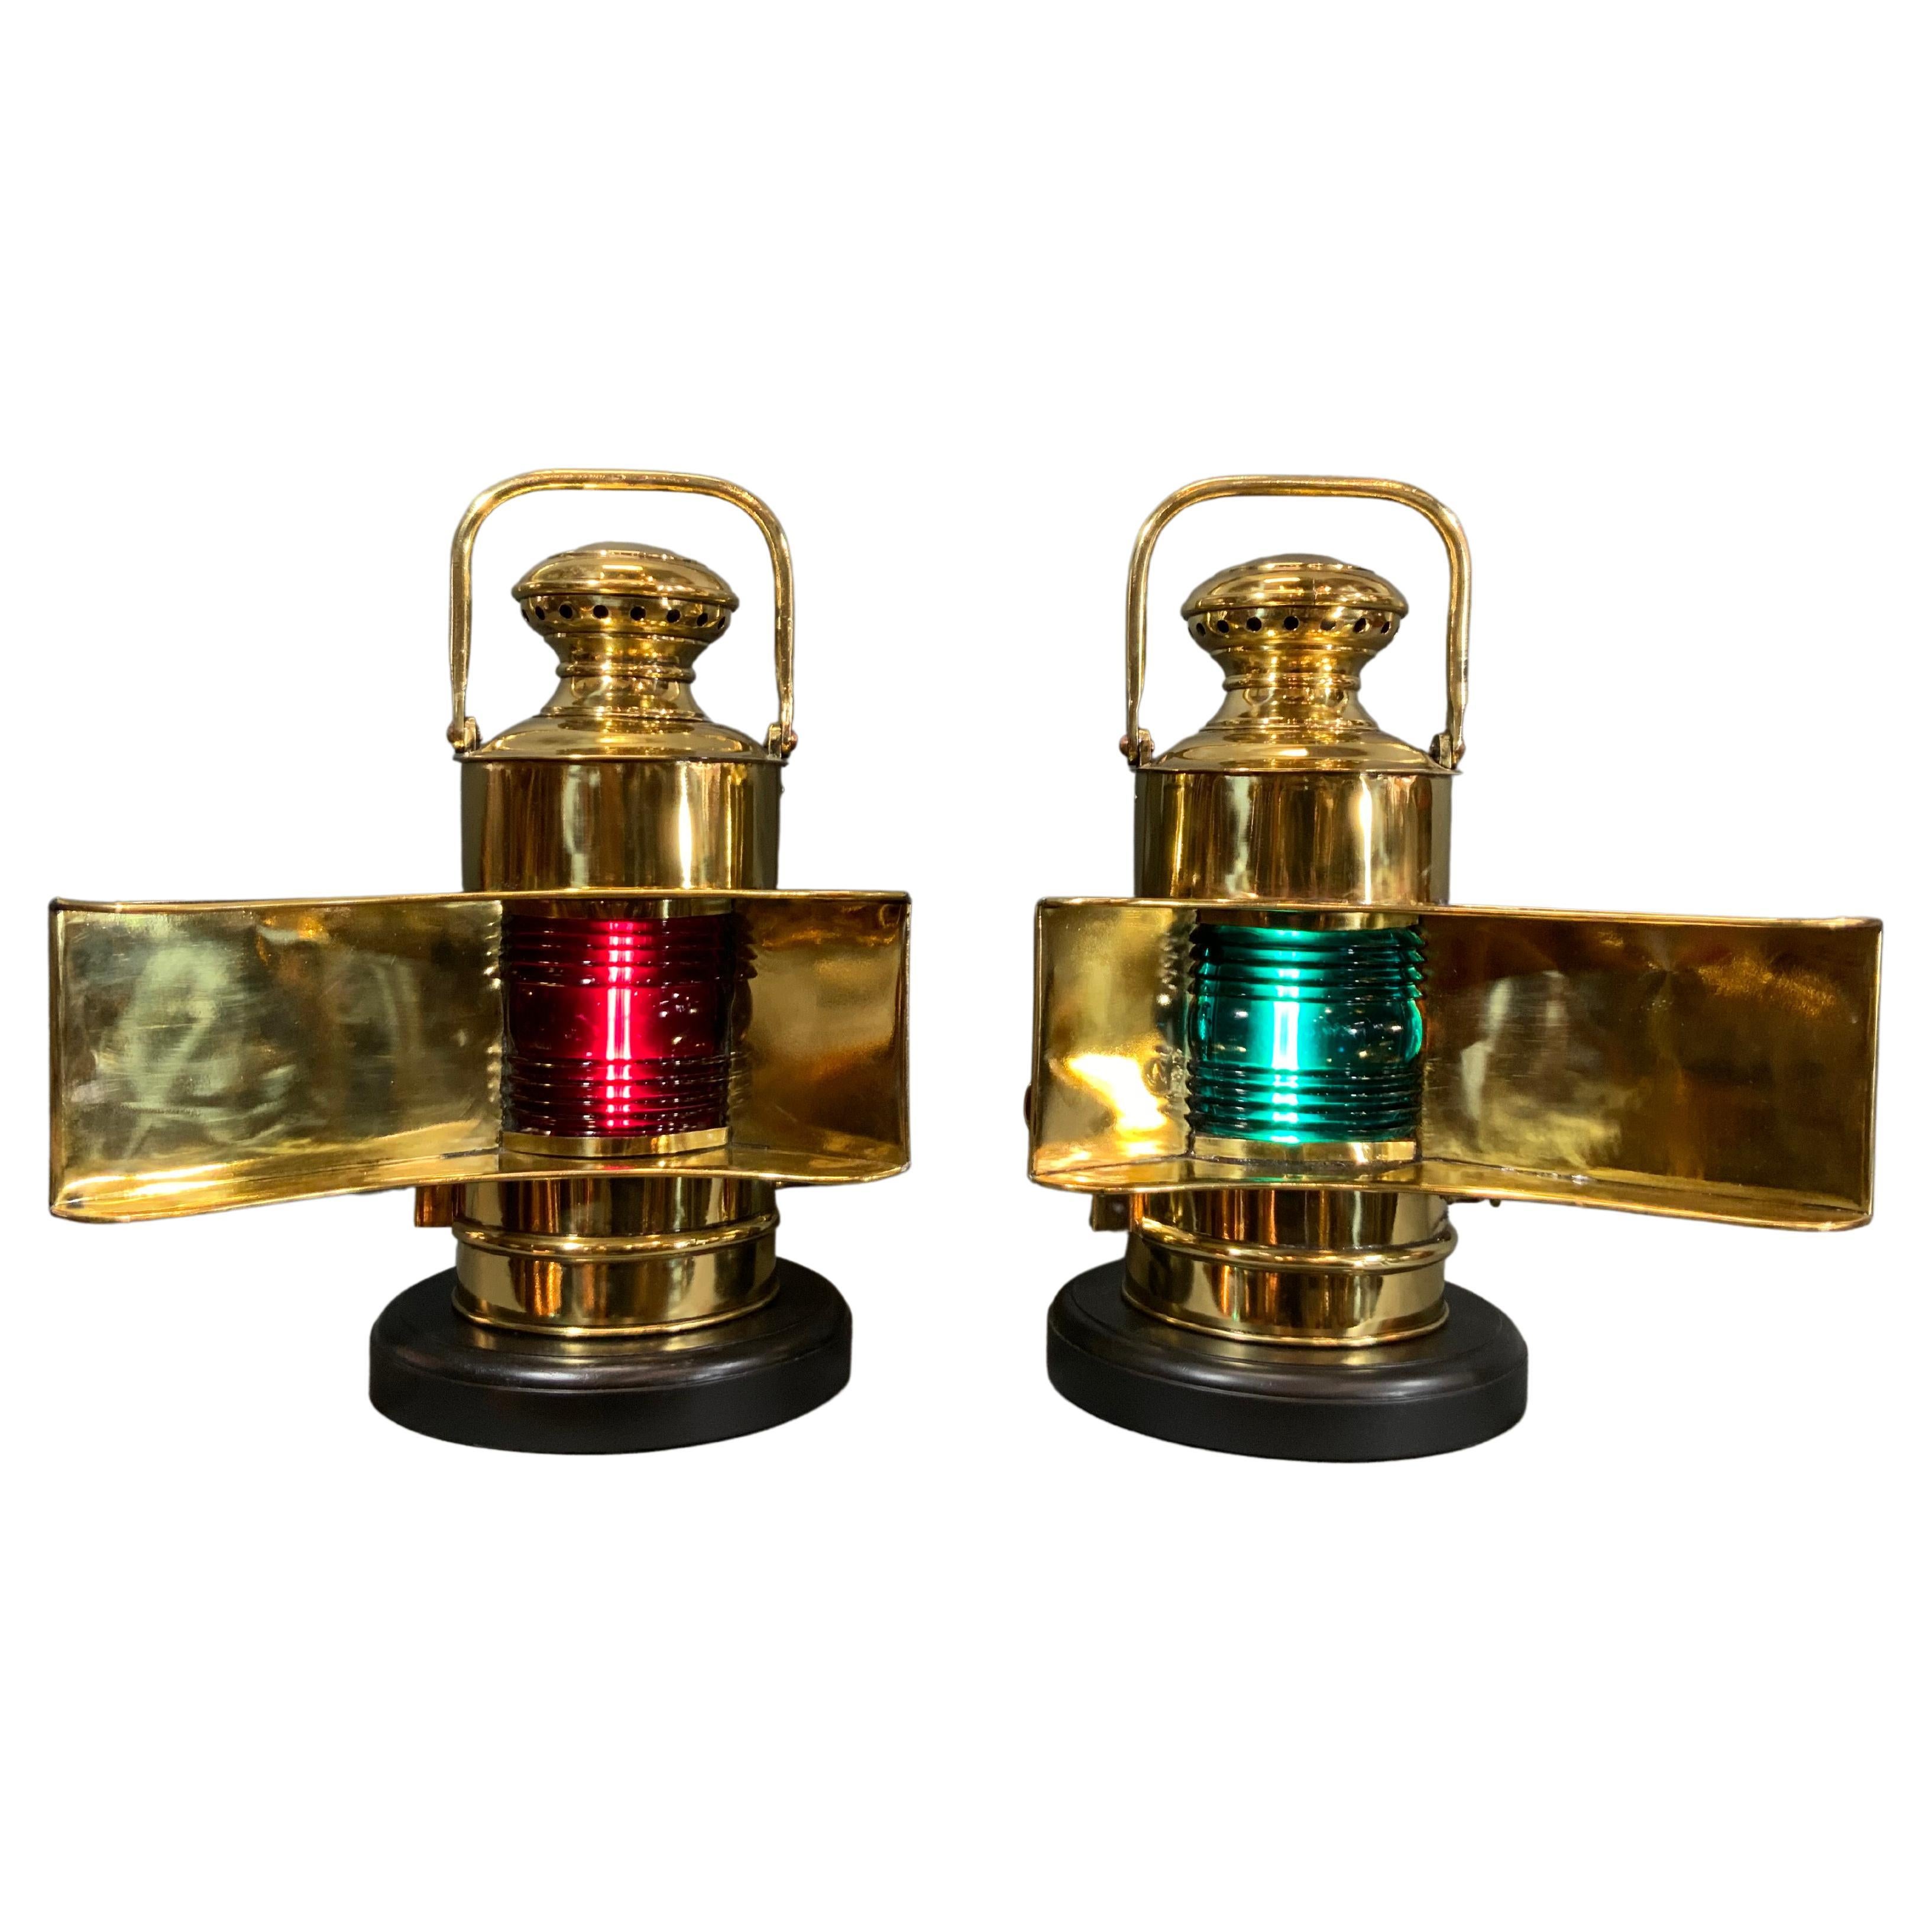 Pair of Solid Brass Ships Port and Starboard Lanterns